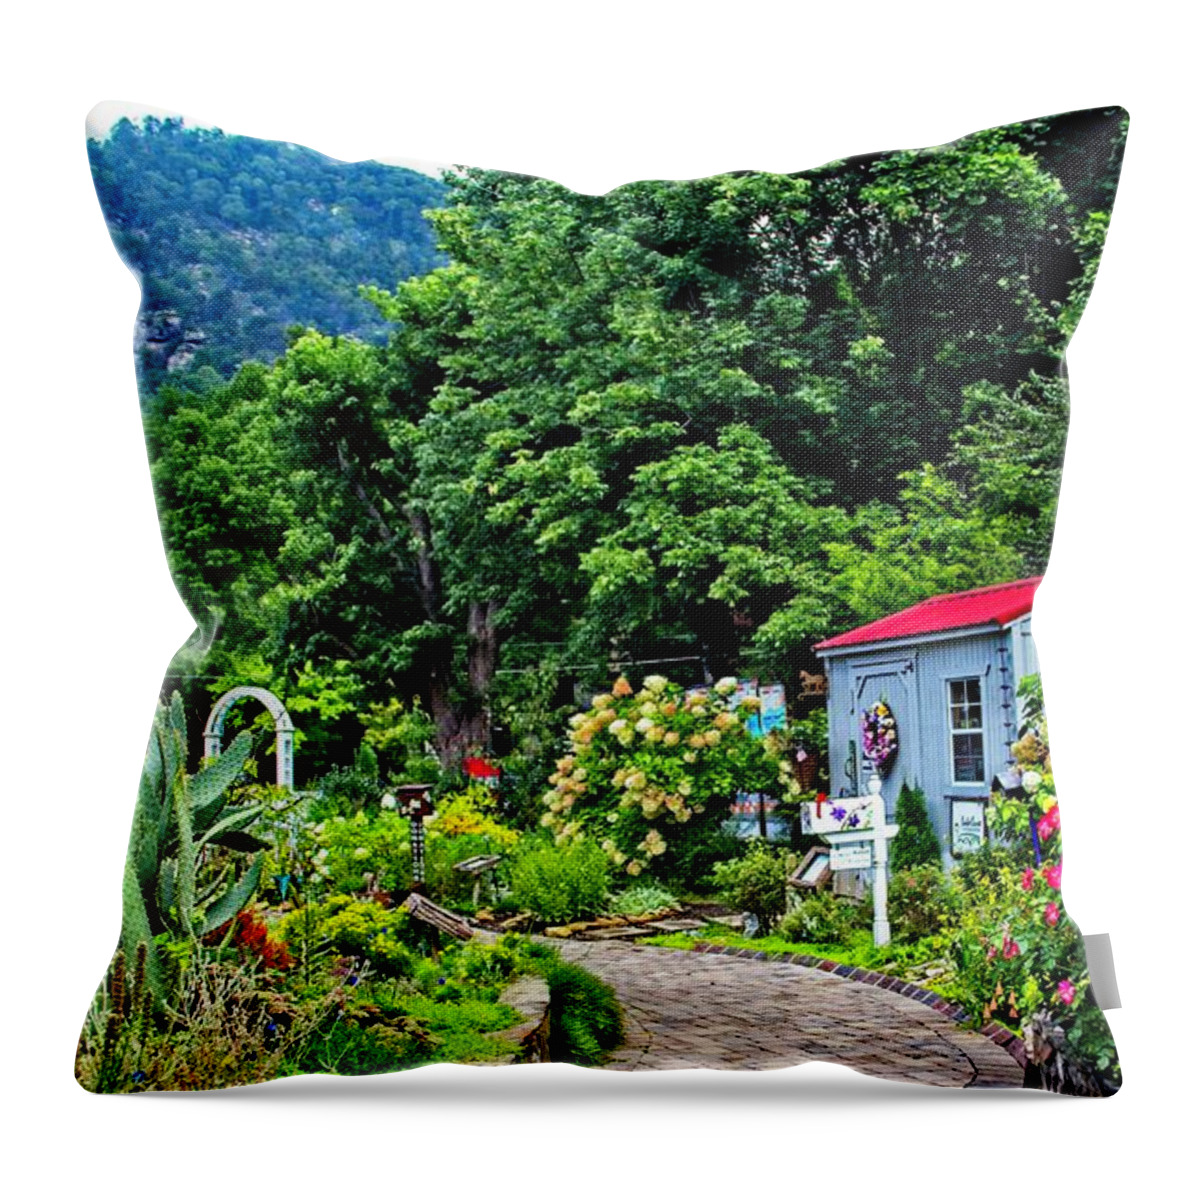 Flowers Throw Pillow featuring the photograph Flowering Bridge by Allen Nice-Webb